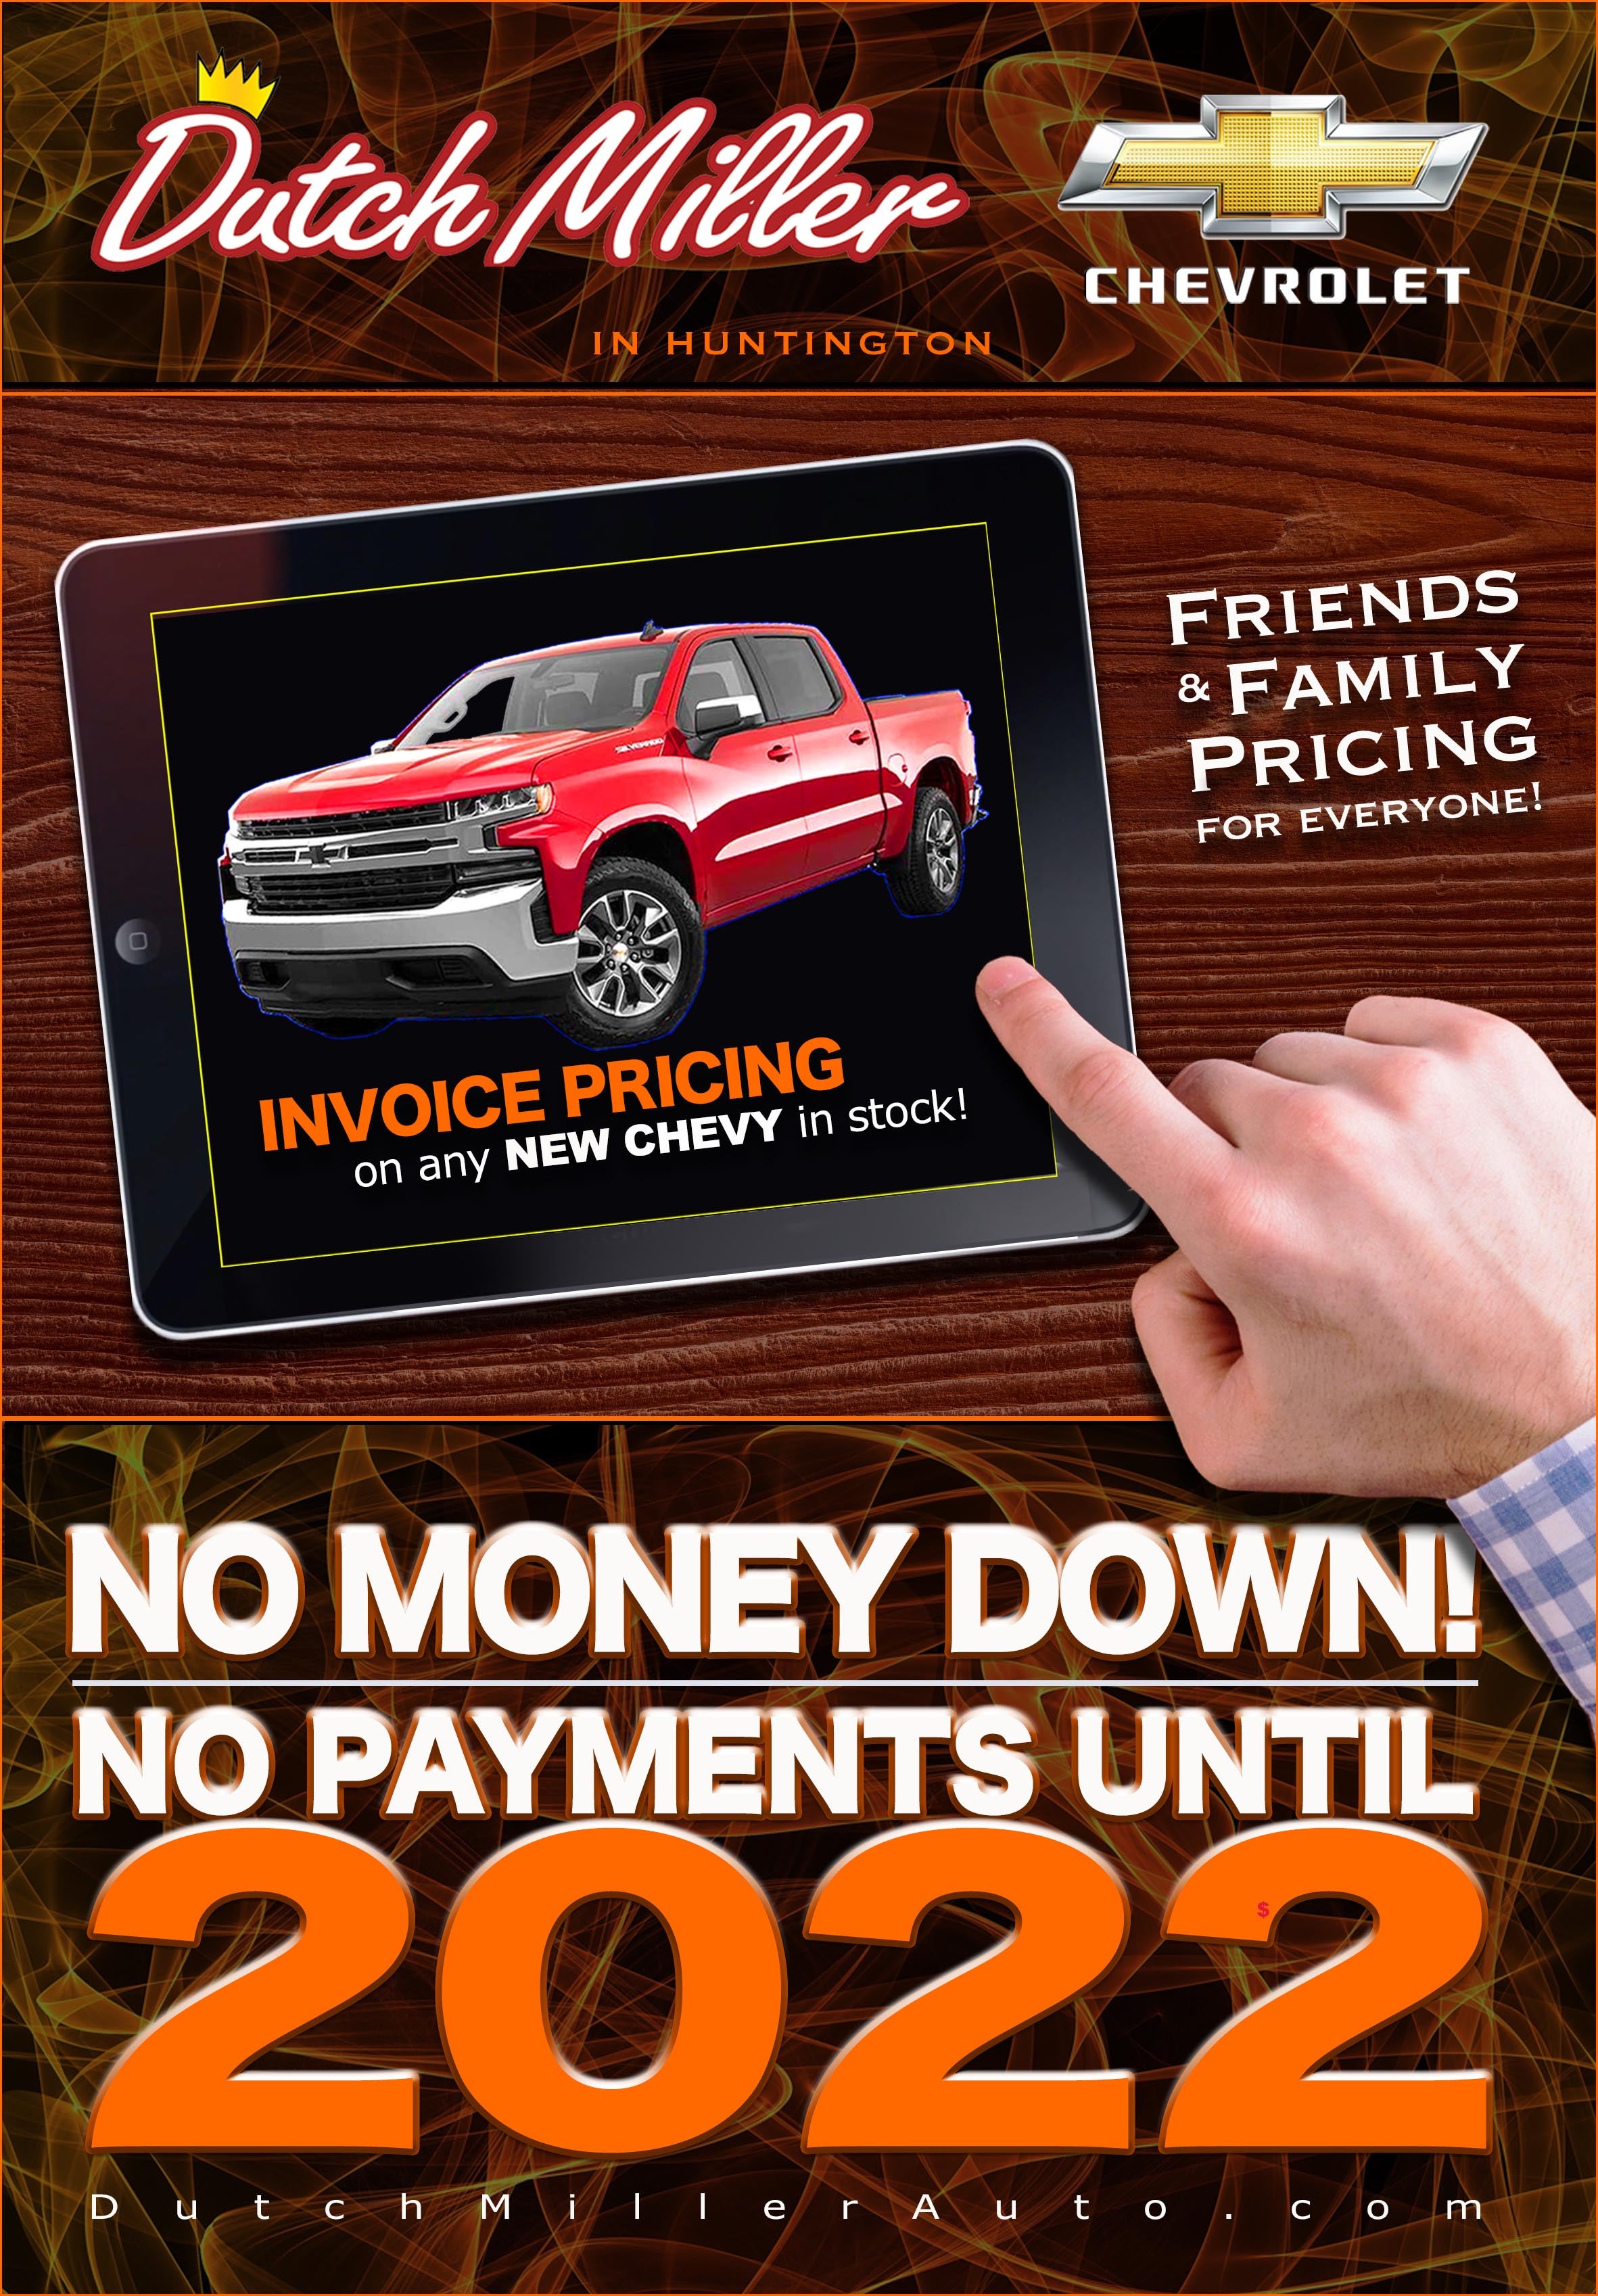 Invoice Pricing on Any New Chevy in Stock